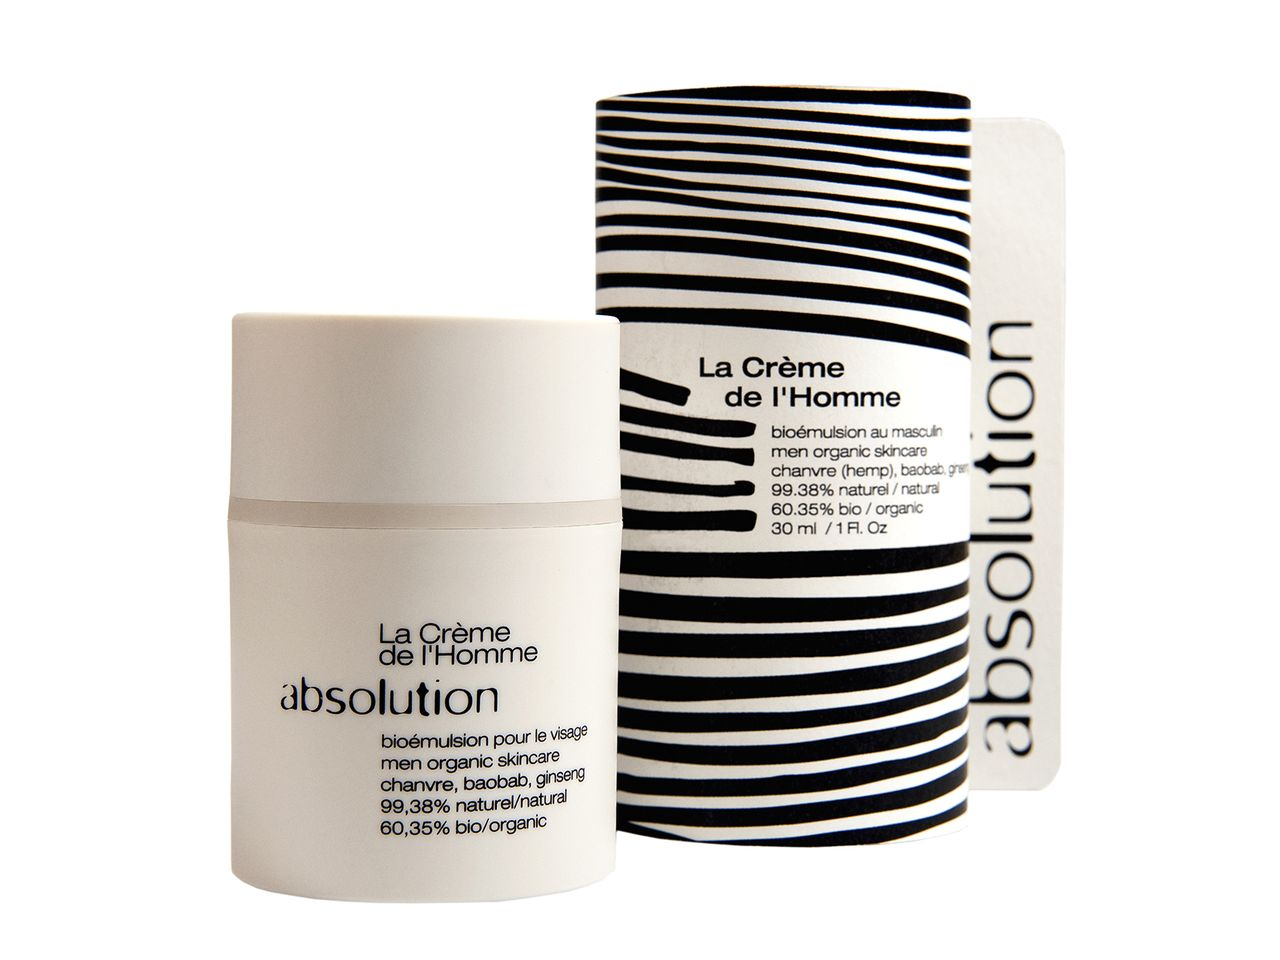 creme-de-homme-absolution-organic-skincare-natural-ingredients-mens-grooming-skincare